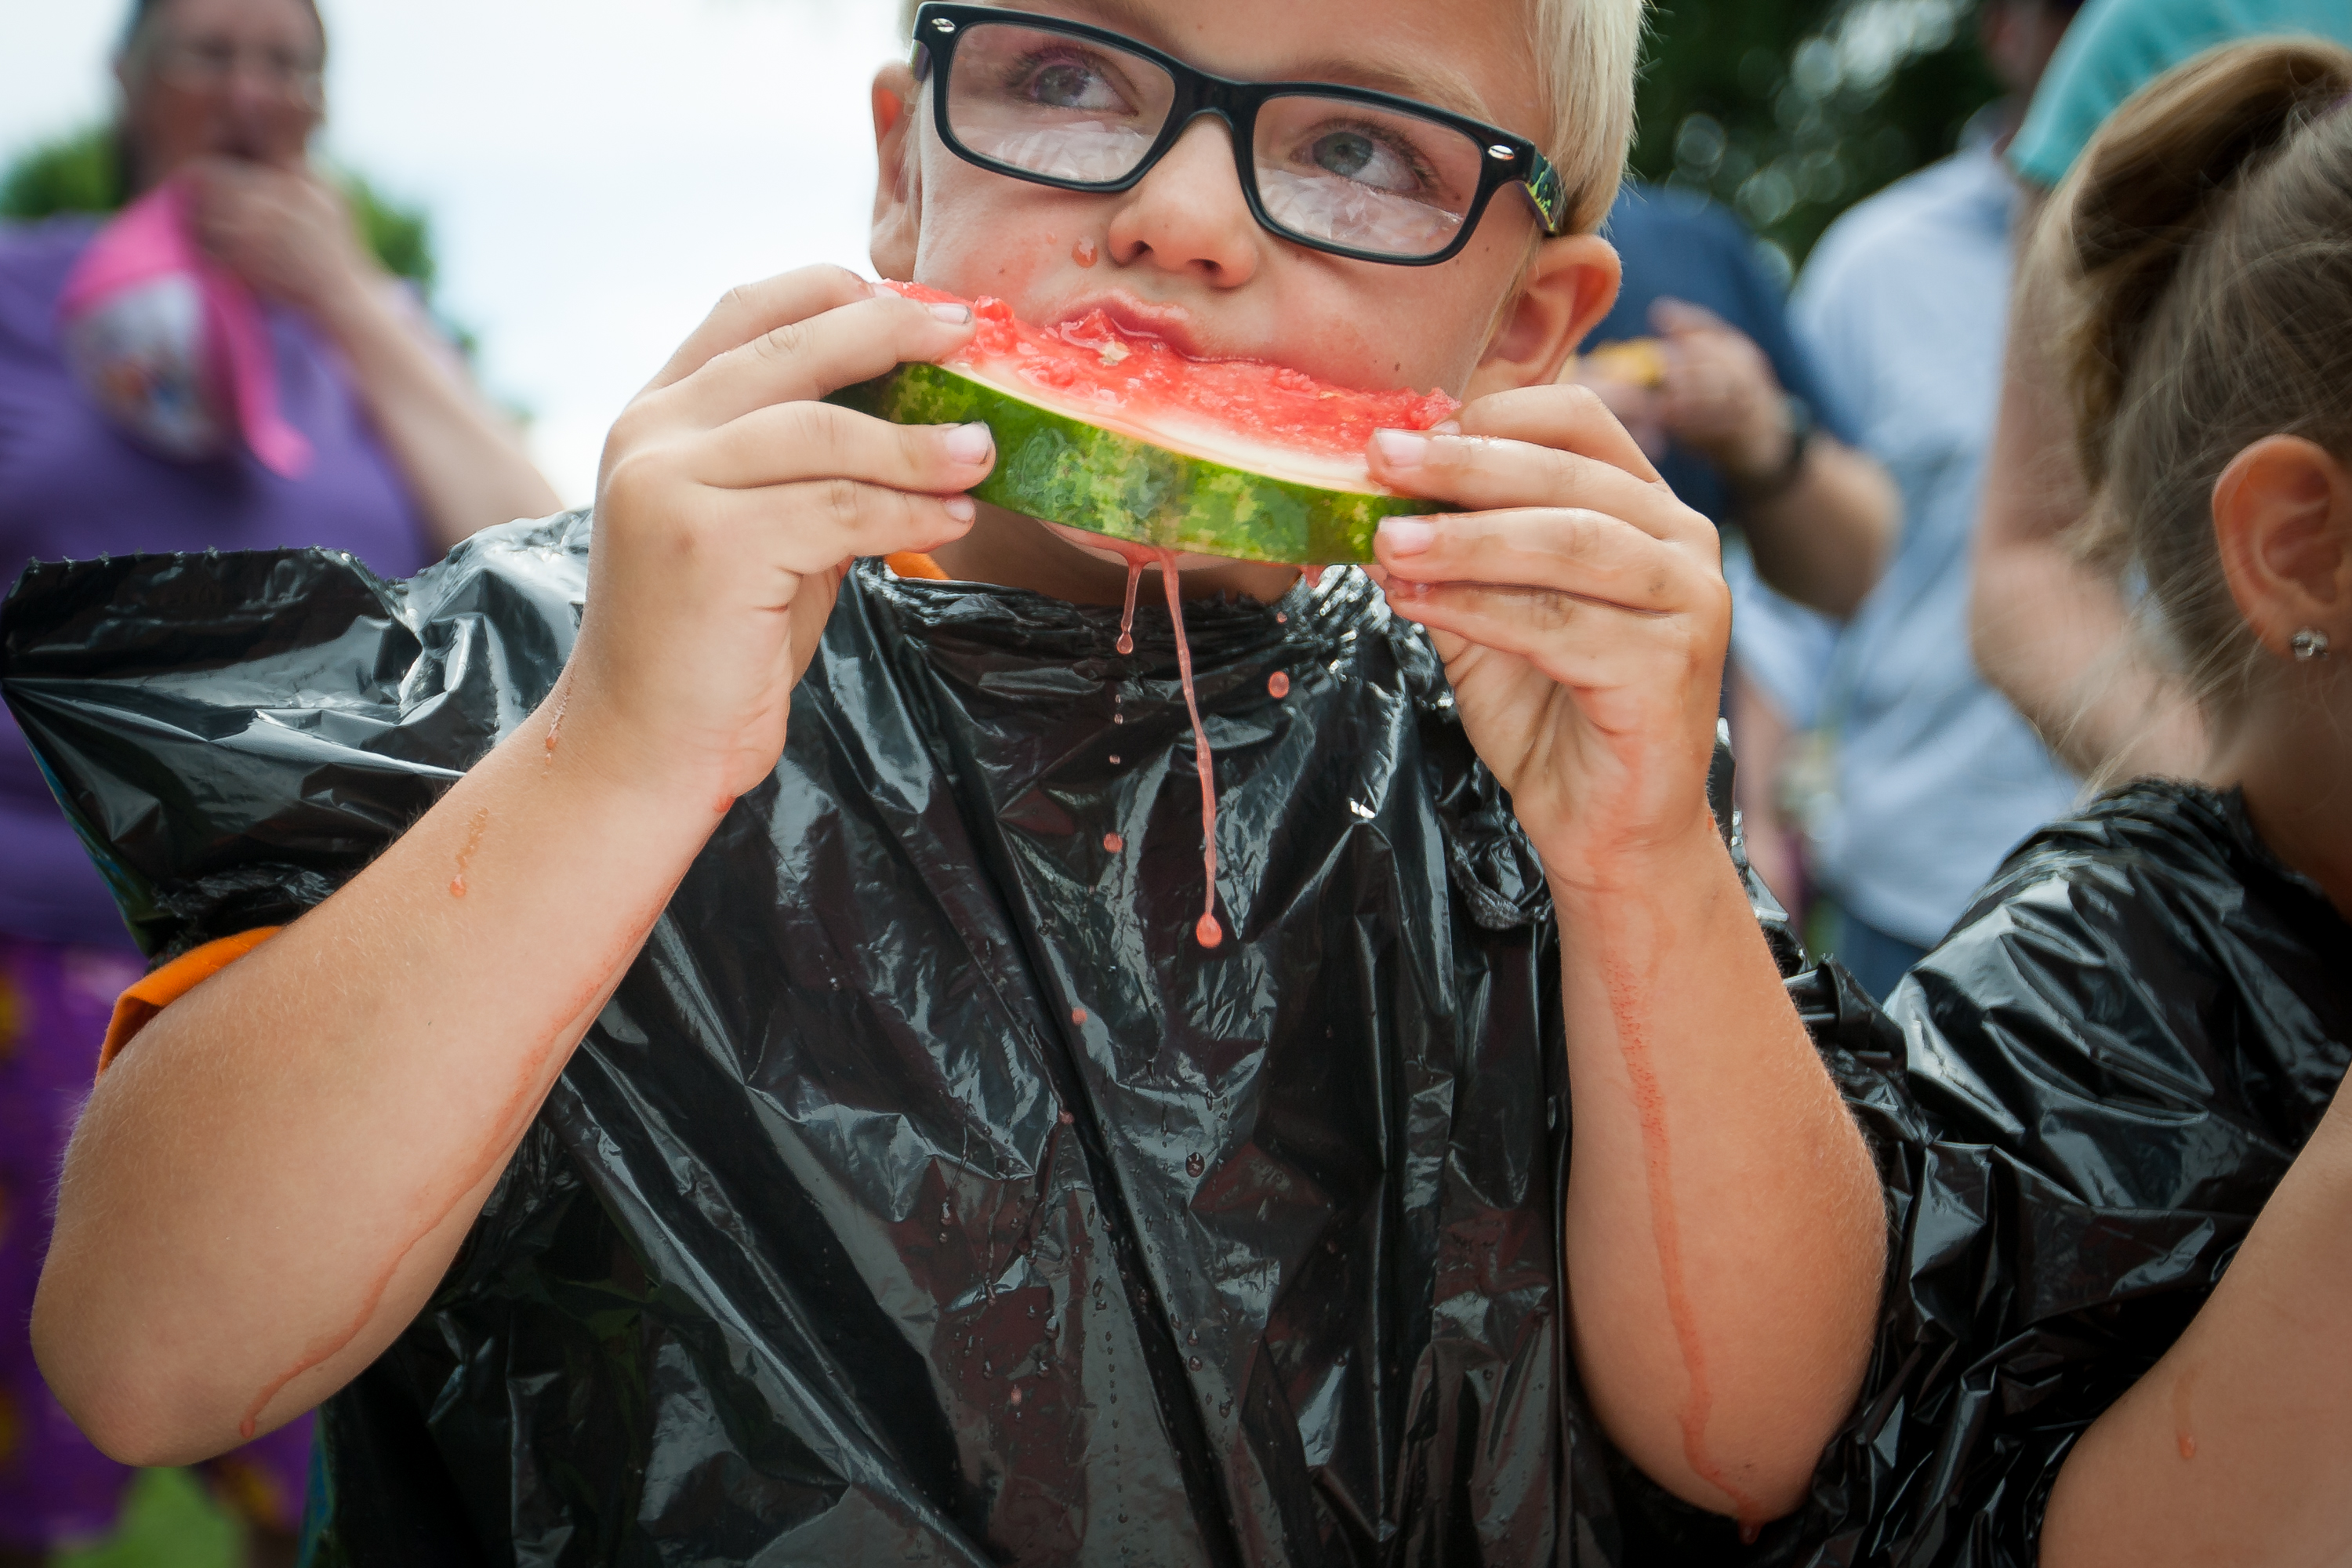 Ed Skarlem, 7, devours his watermelon piece in the watermelon-eating contest held in Larimore, N.D. as part of the Larimore Days celebration on July 16, 2016.